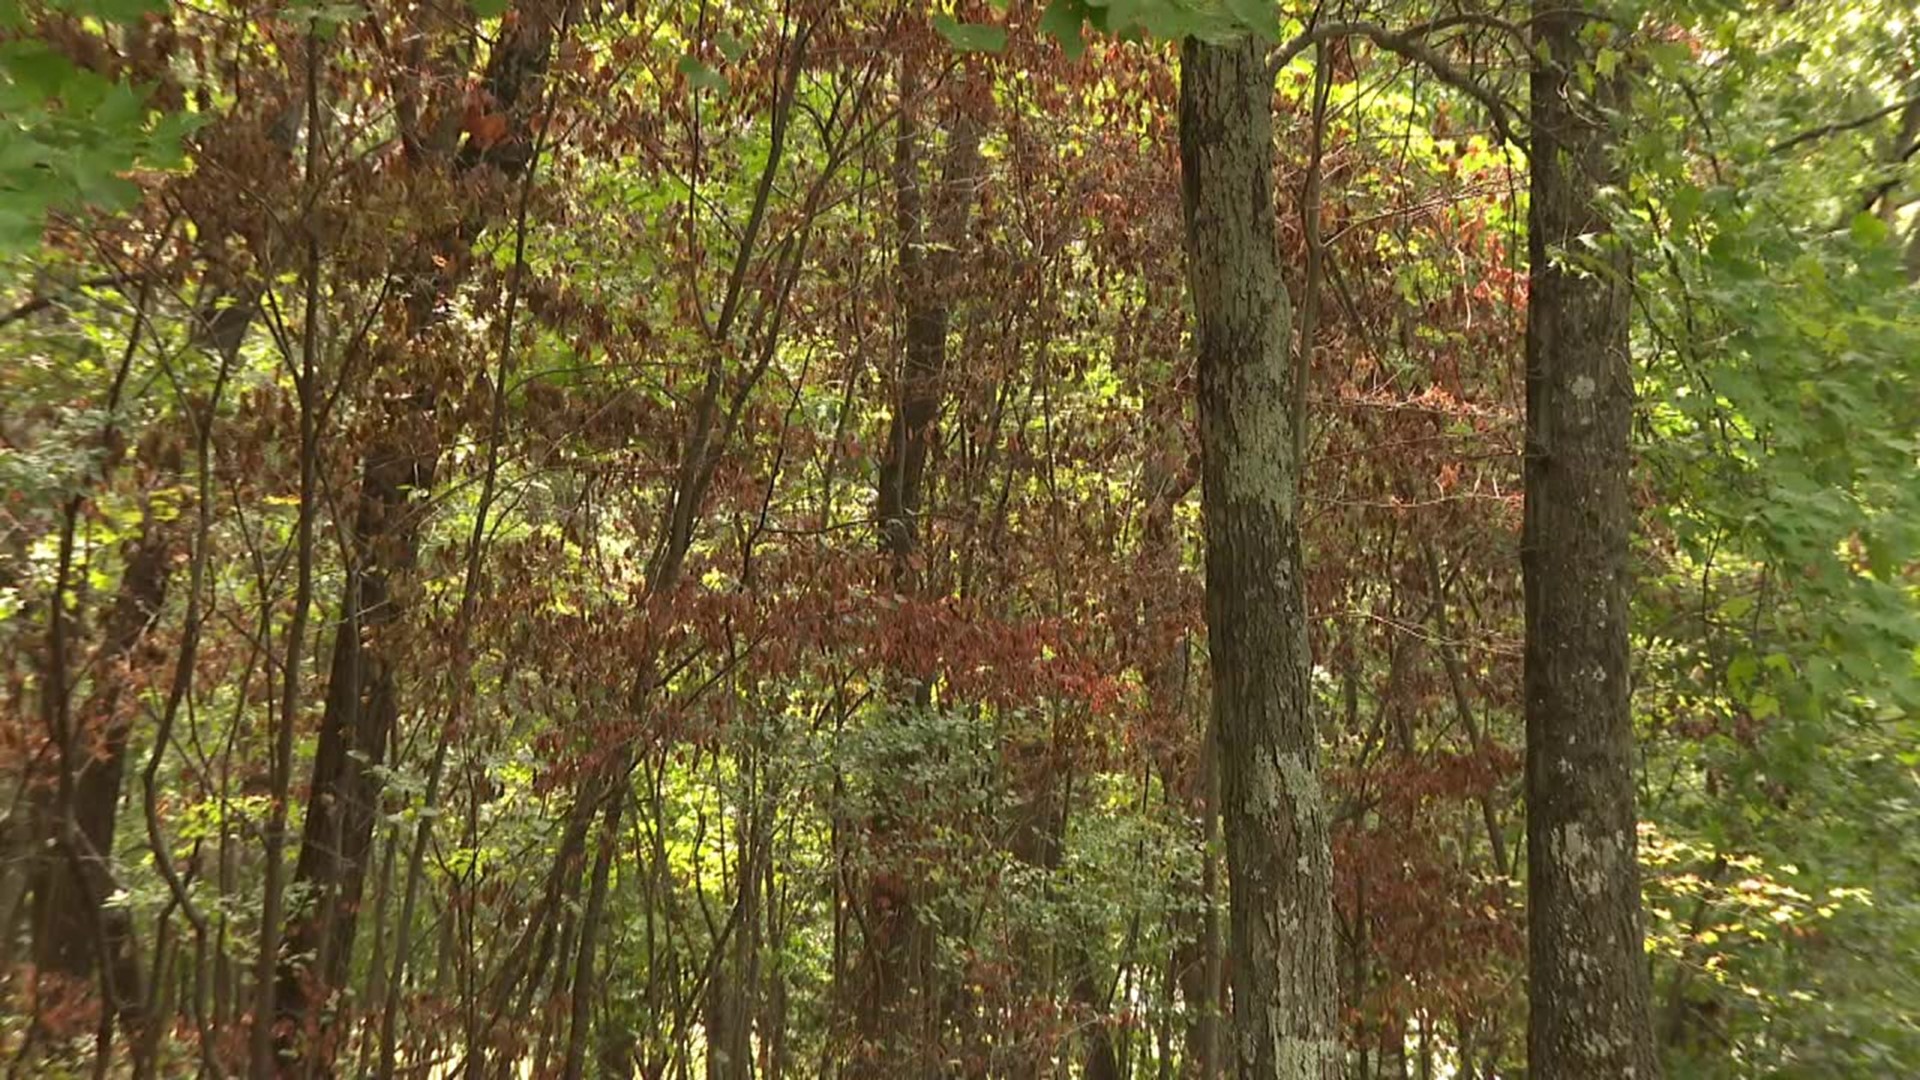 DCNR officials expect trees to get their fall colors sooner, and the season will be shorter.